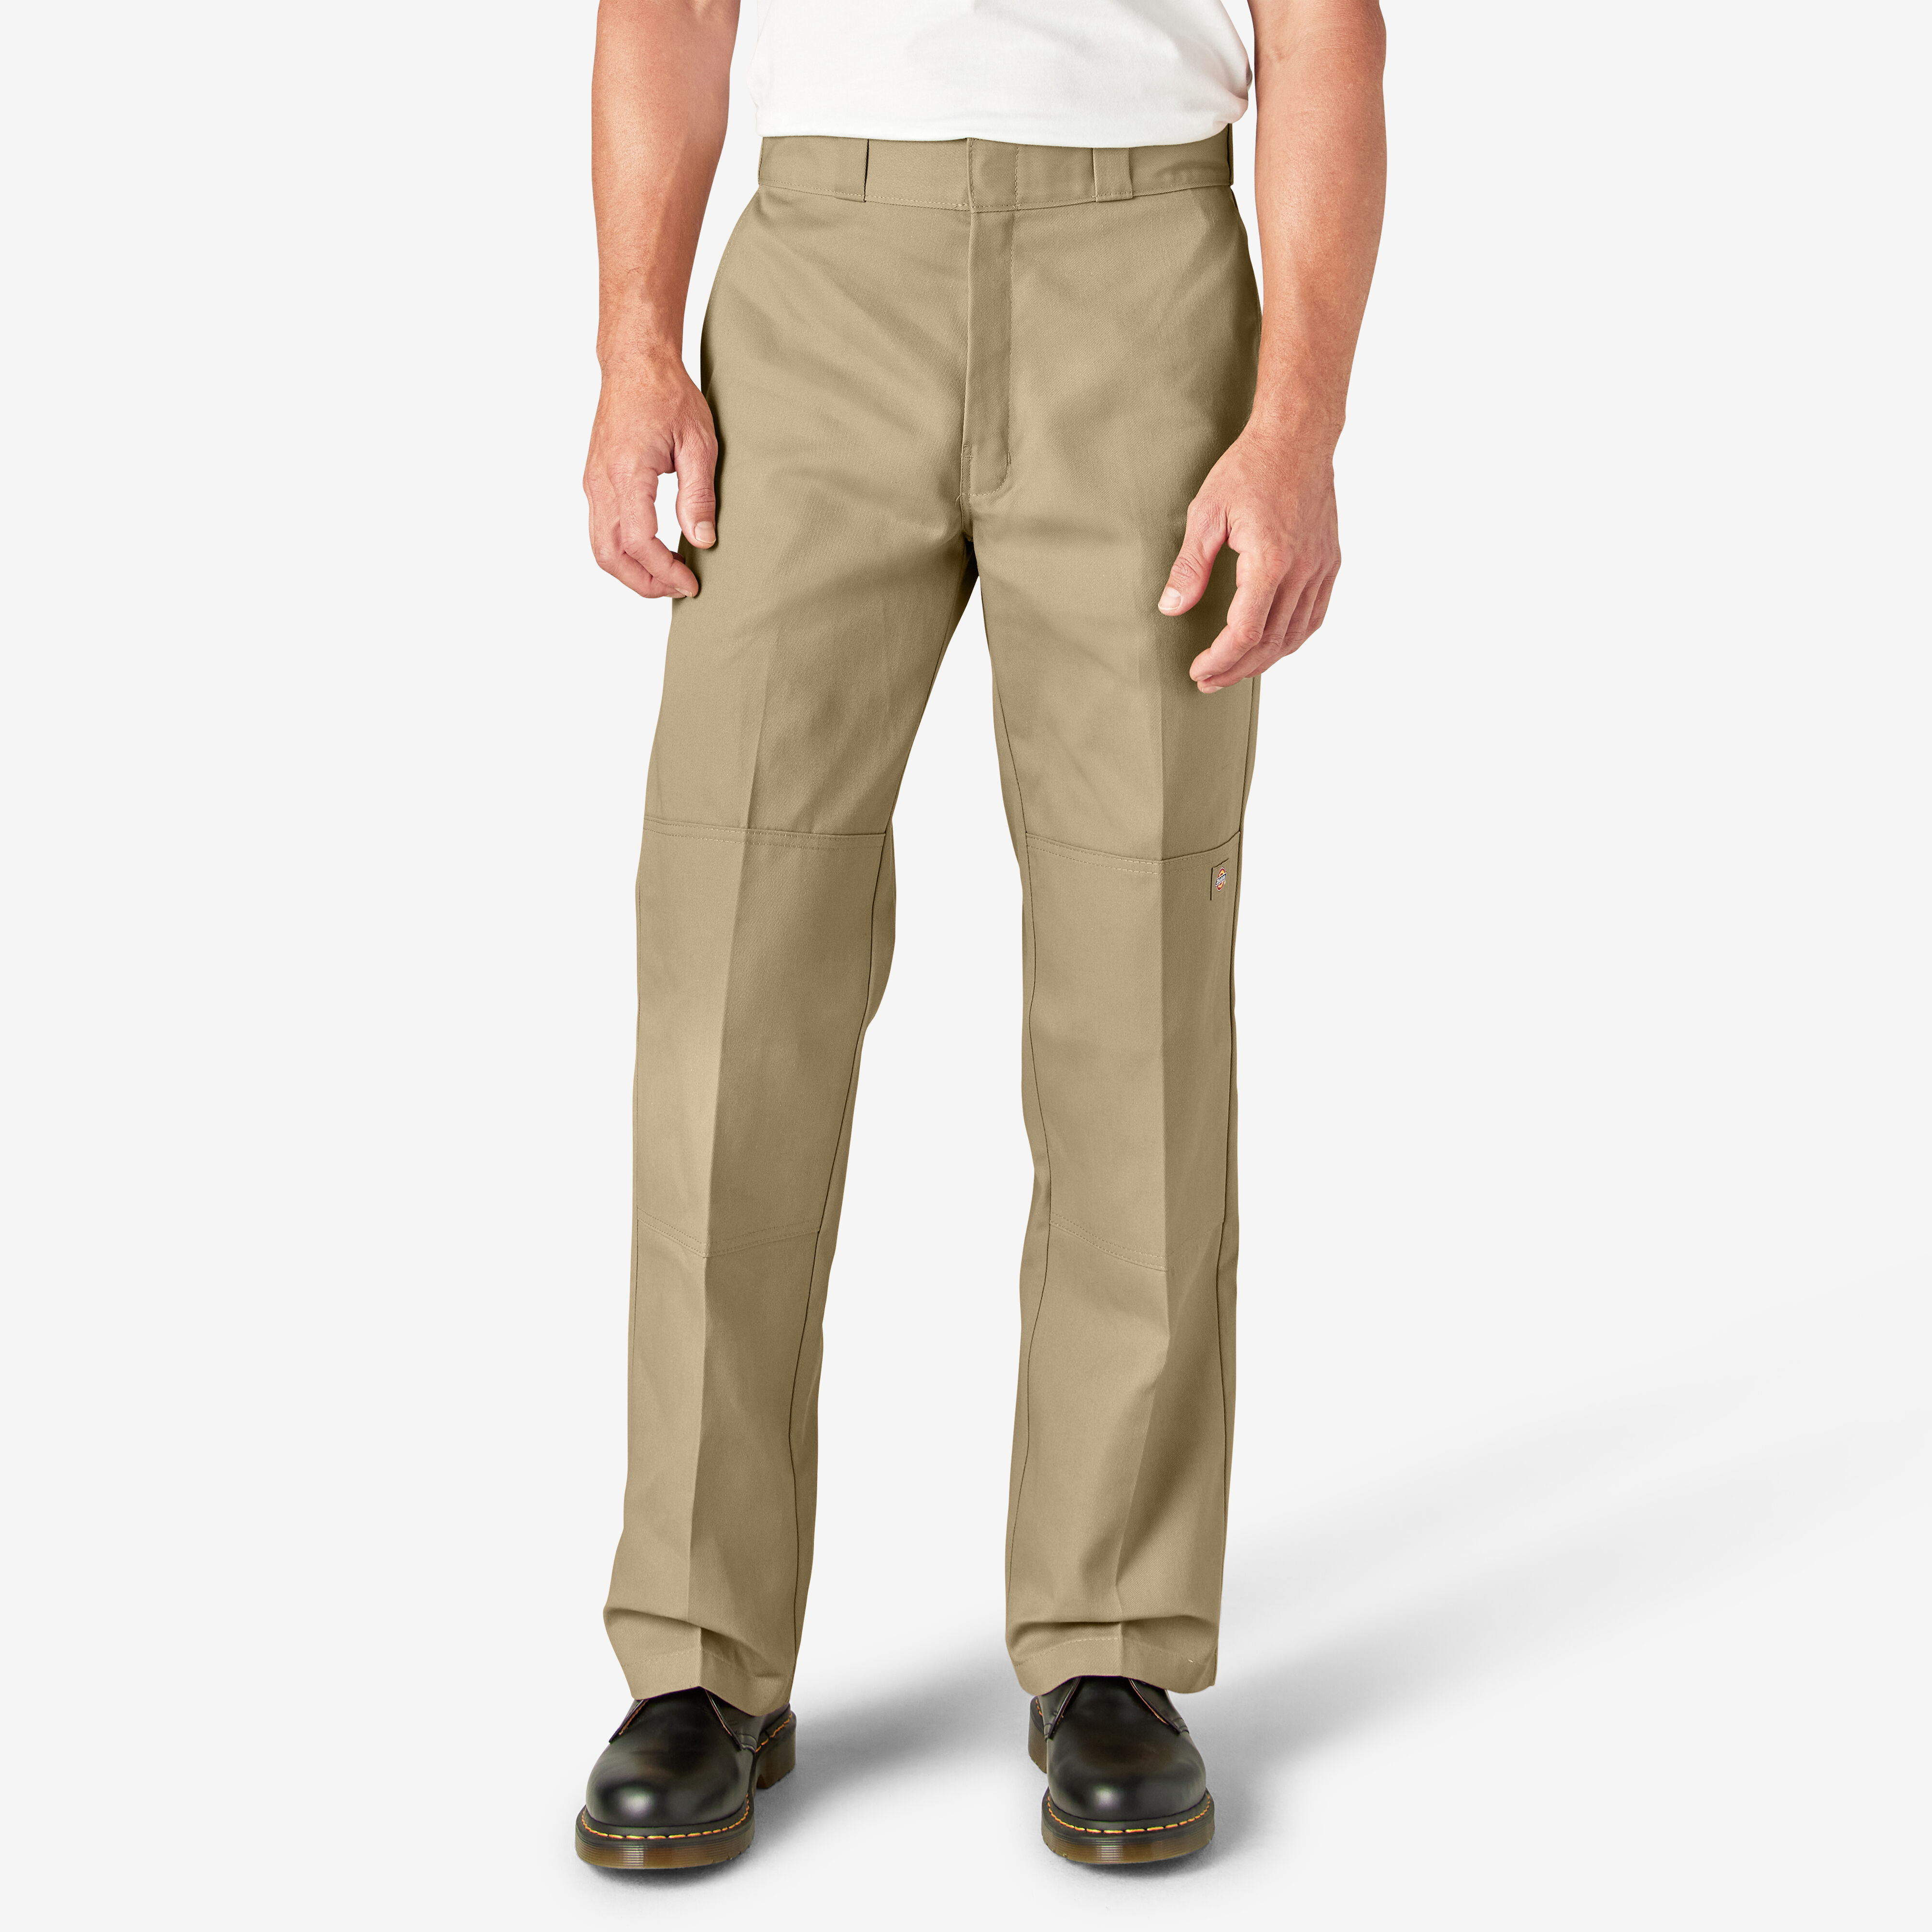 Dickies 23214 8.5 oz. Loose Fit Cargo Work Pant - From $38.64